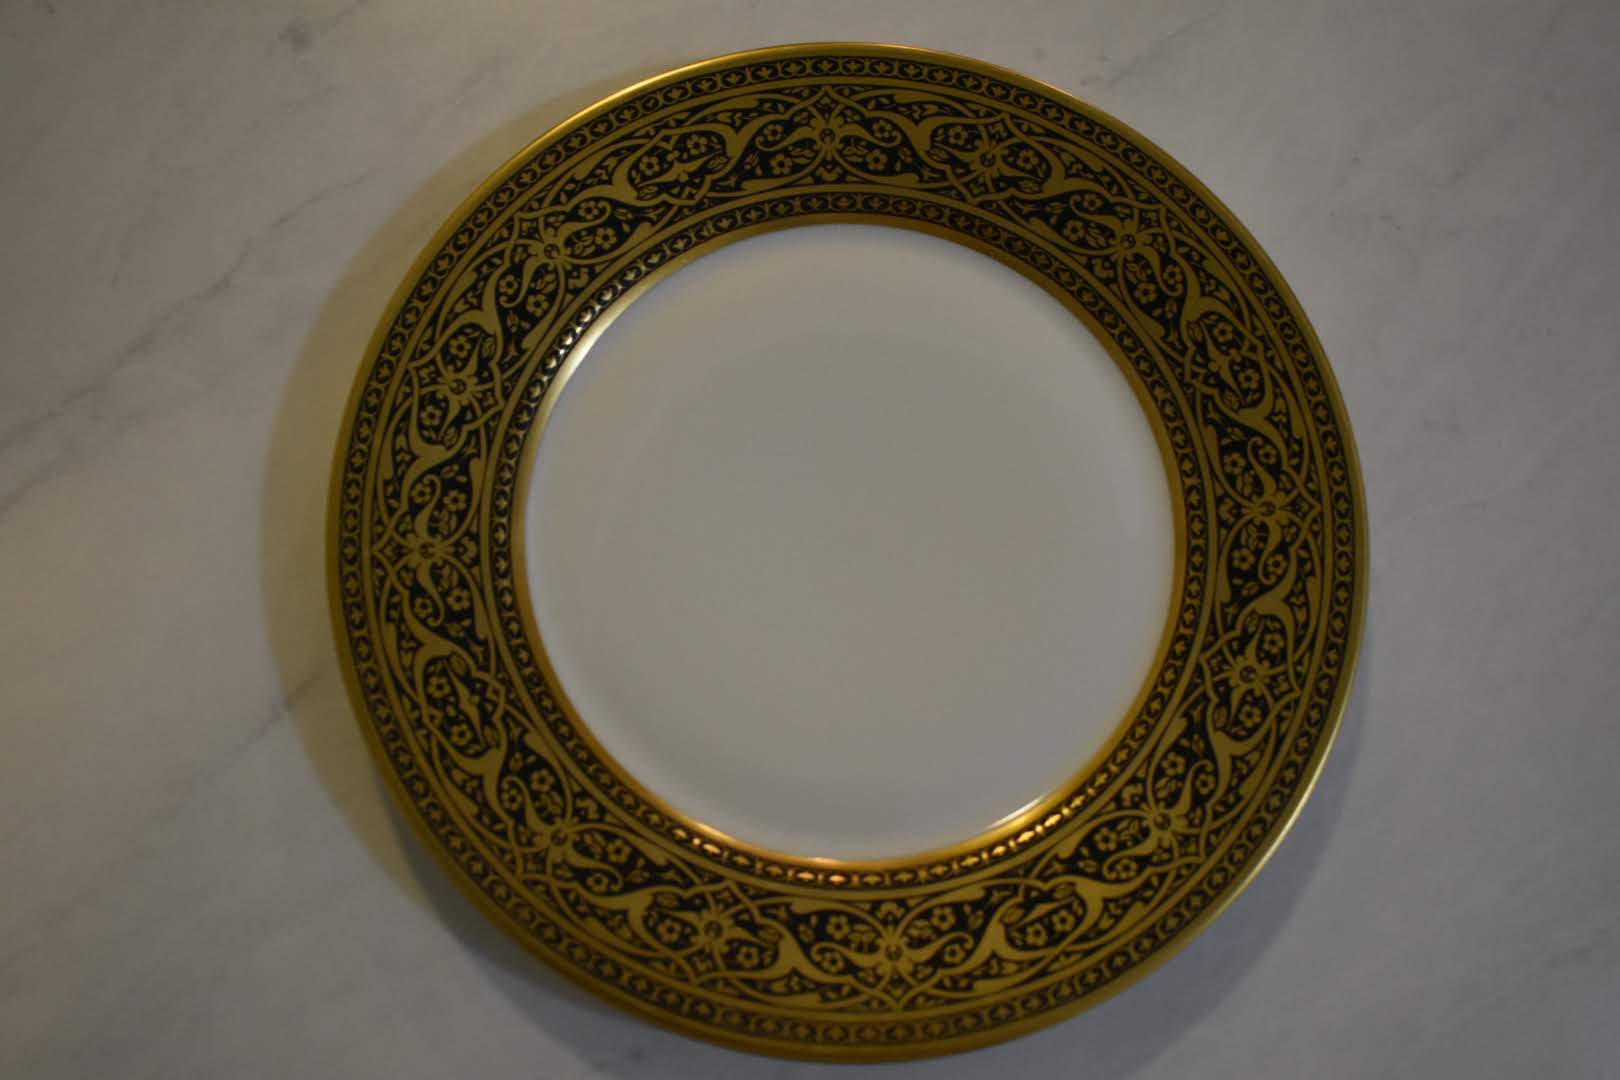 Porcelain Opaque Milk Glass  - Collectible  - Gold Hand Painted - Decor Plate